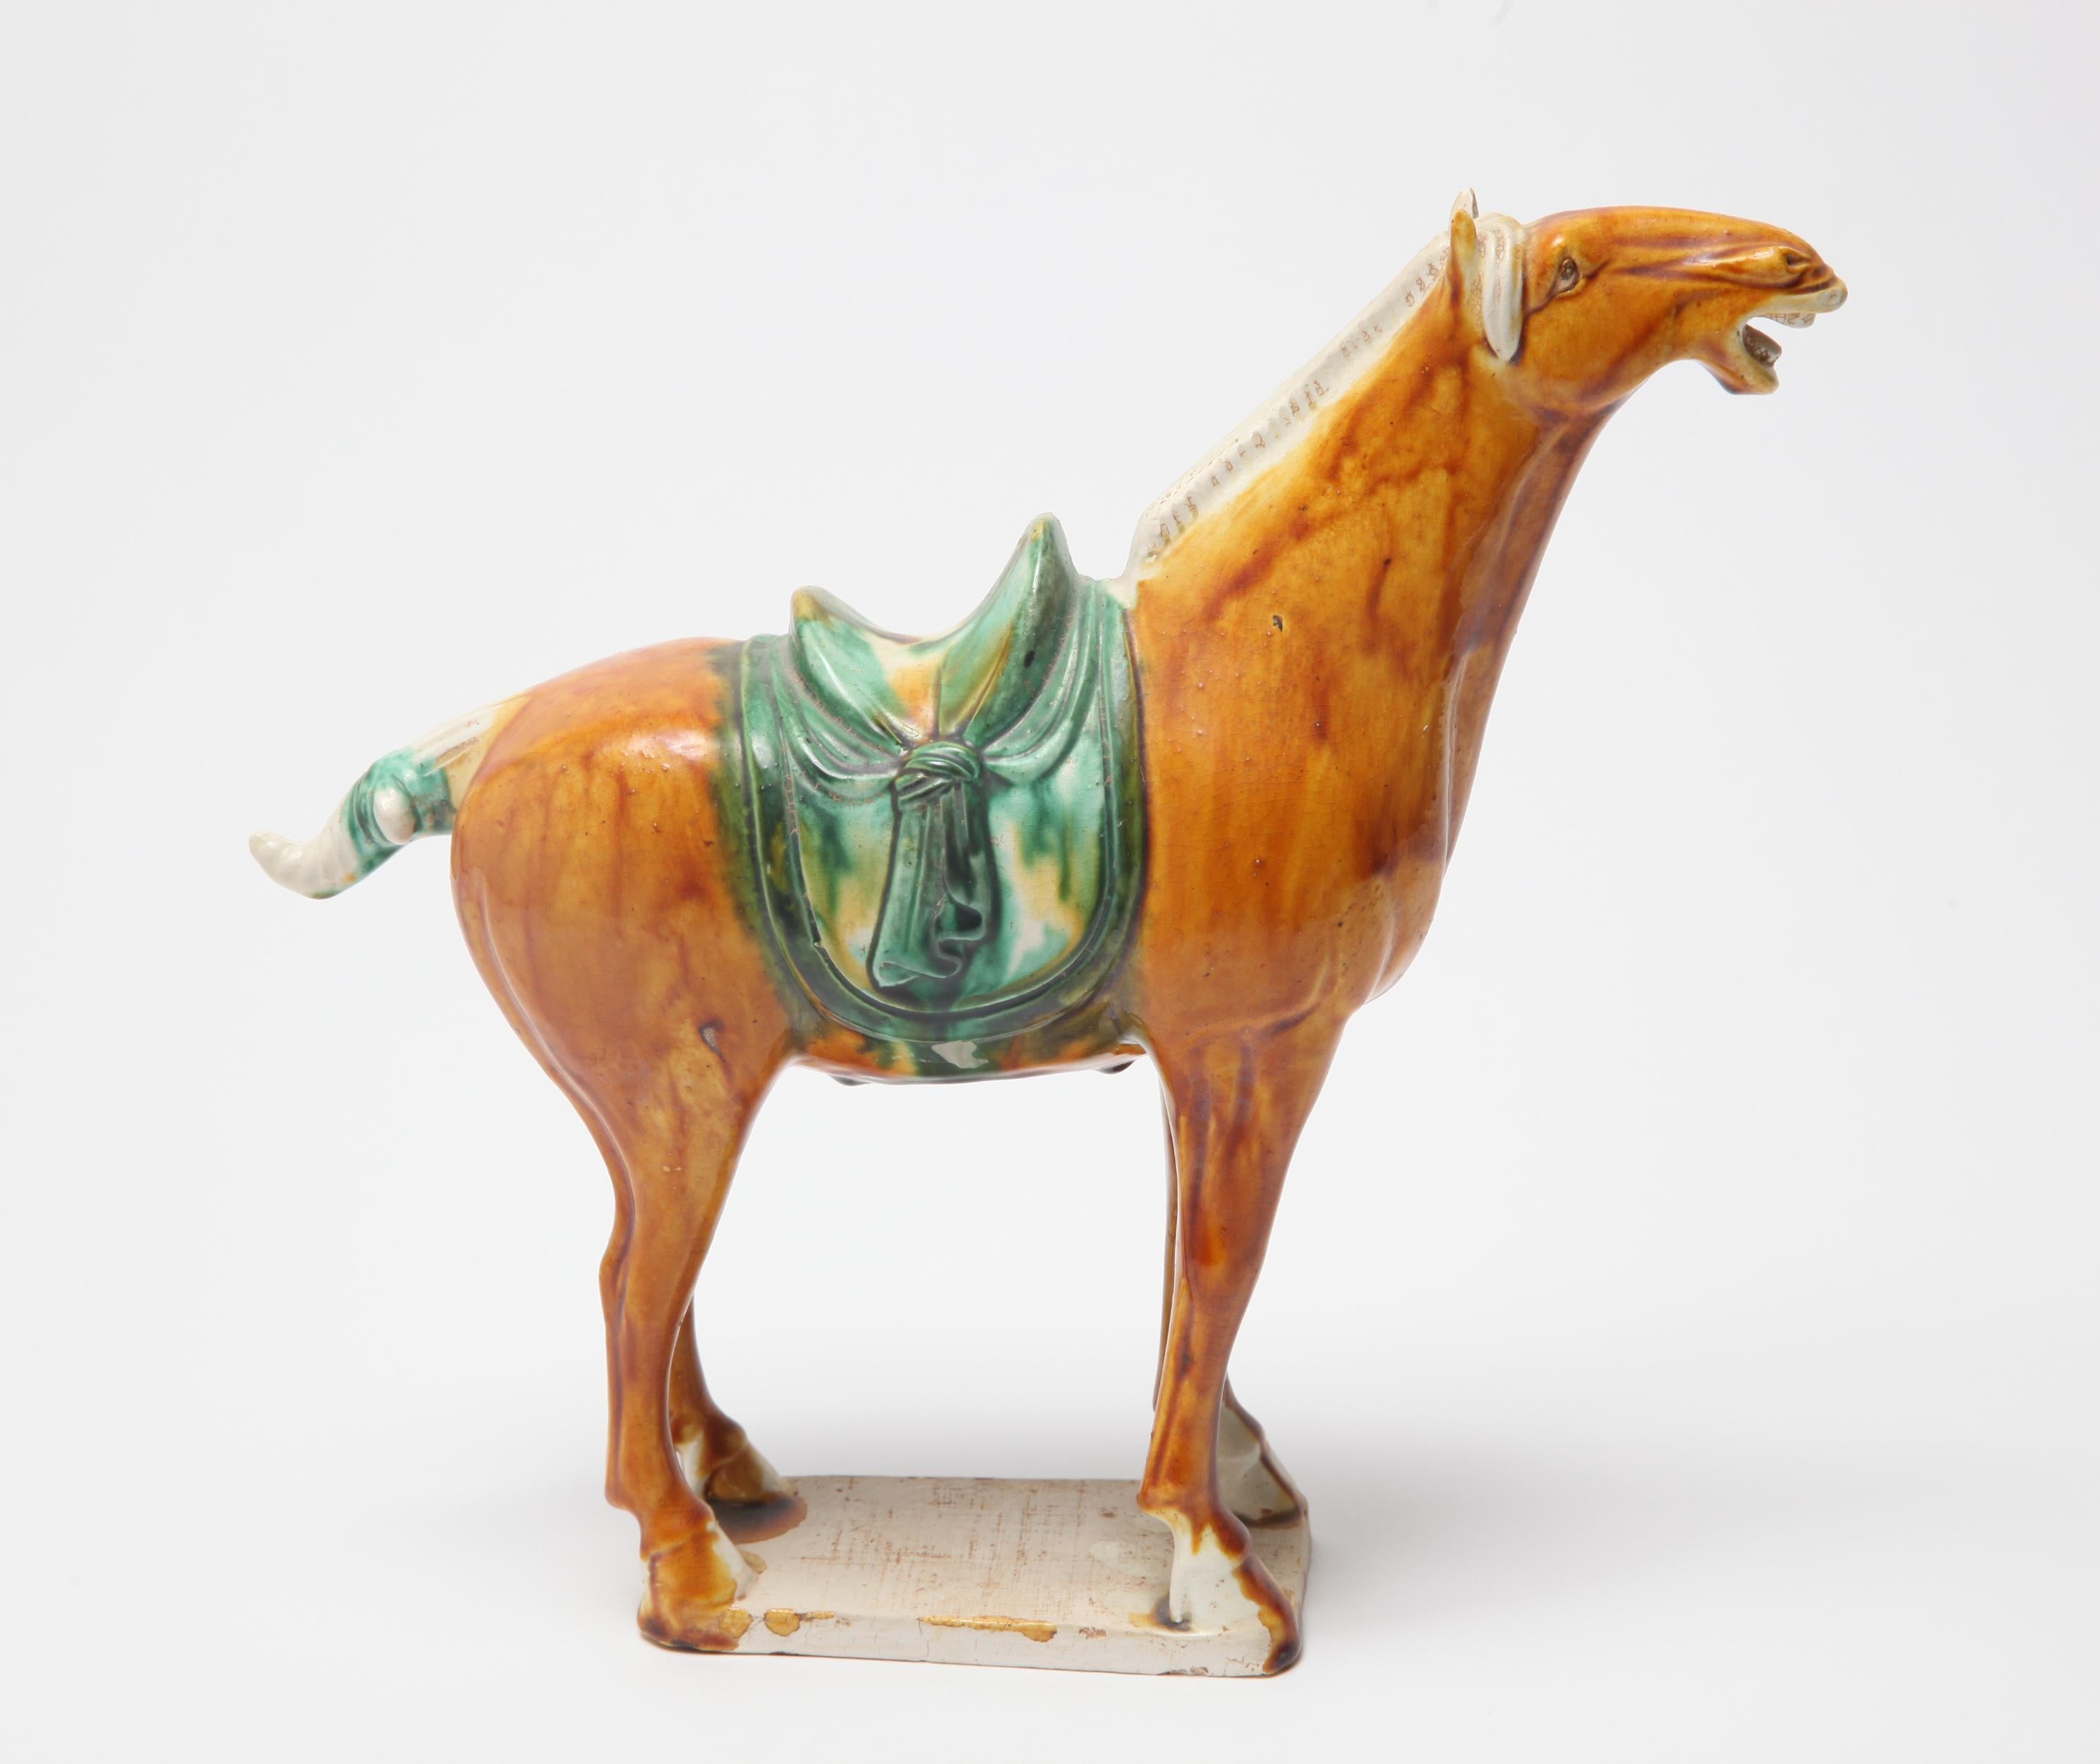 Chinese Tang dynasty style sancai glazed ceramic horse sculpture. The piece is in great vintage condition with age-appropriate wear and use.